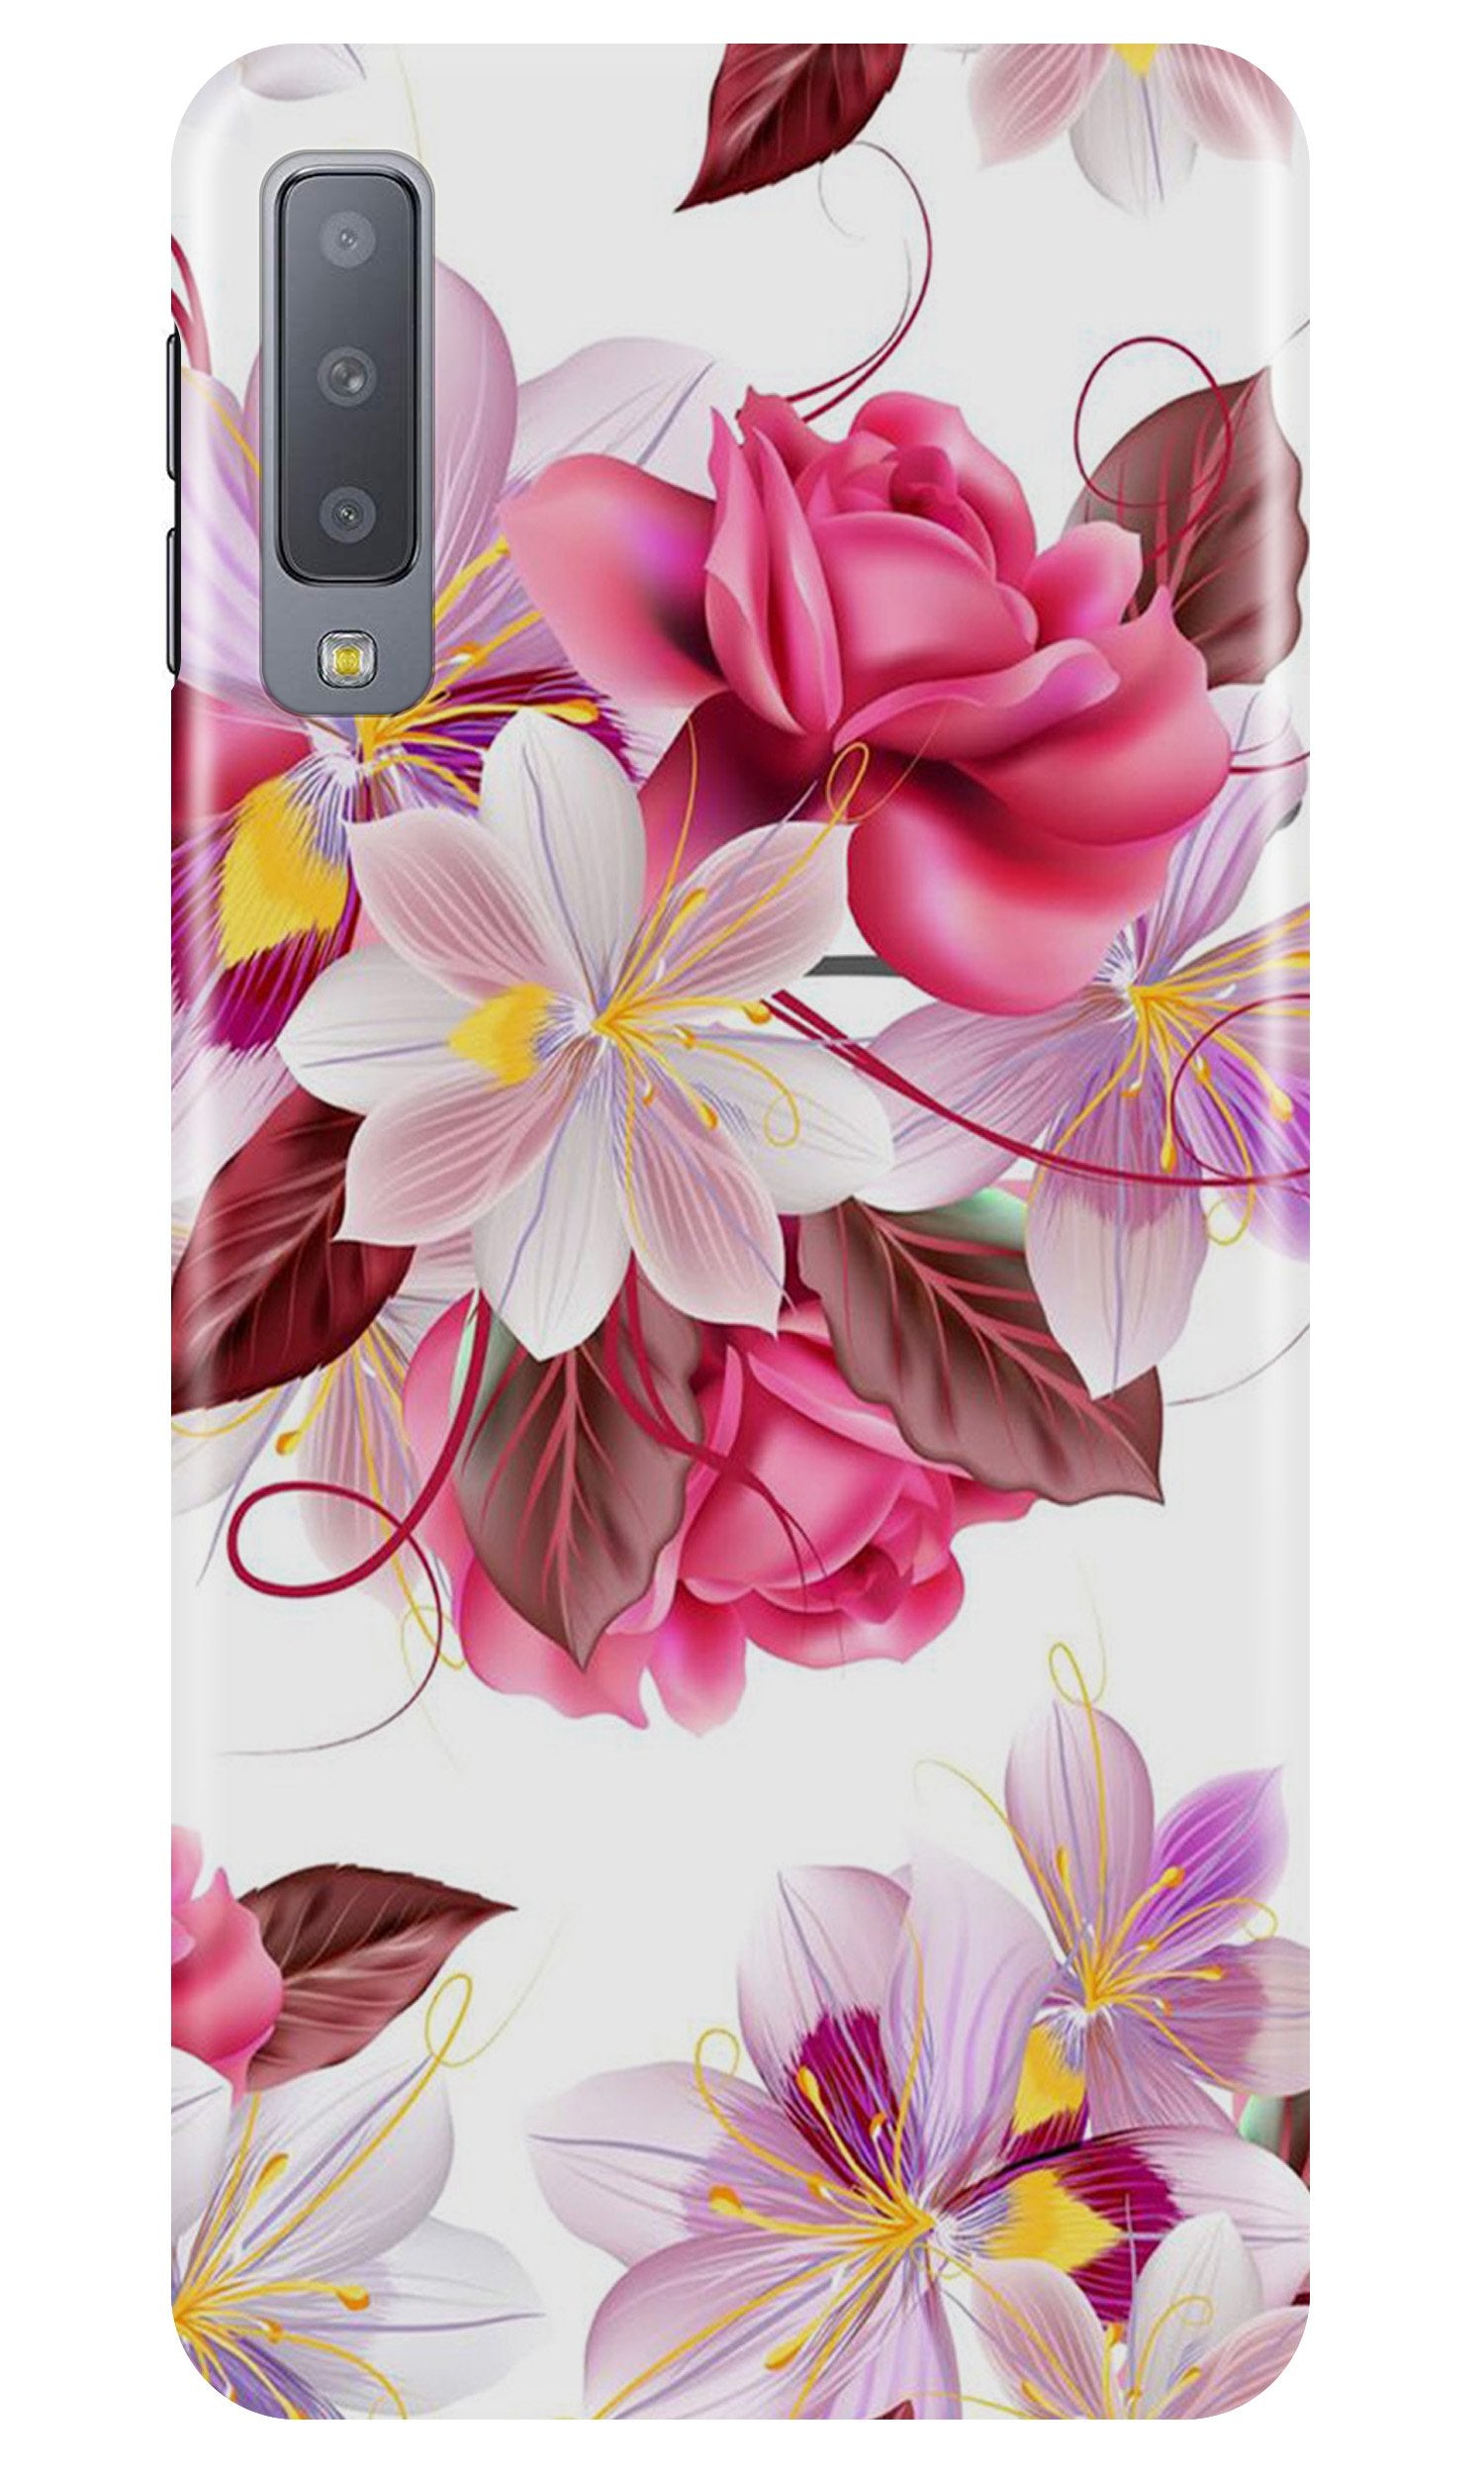 Beautiful flowers Case for Samsung Galaxy A70